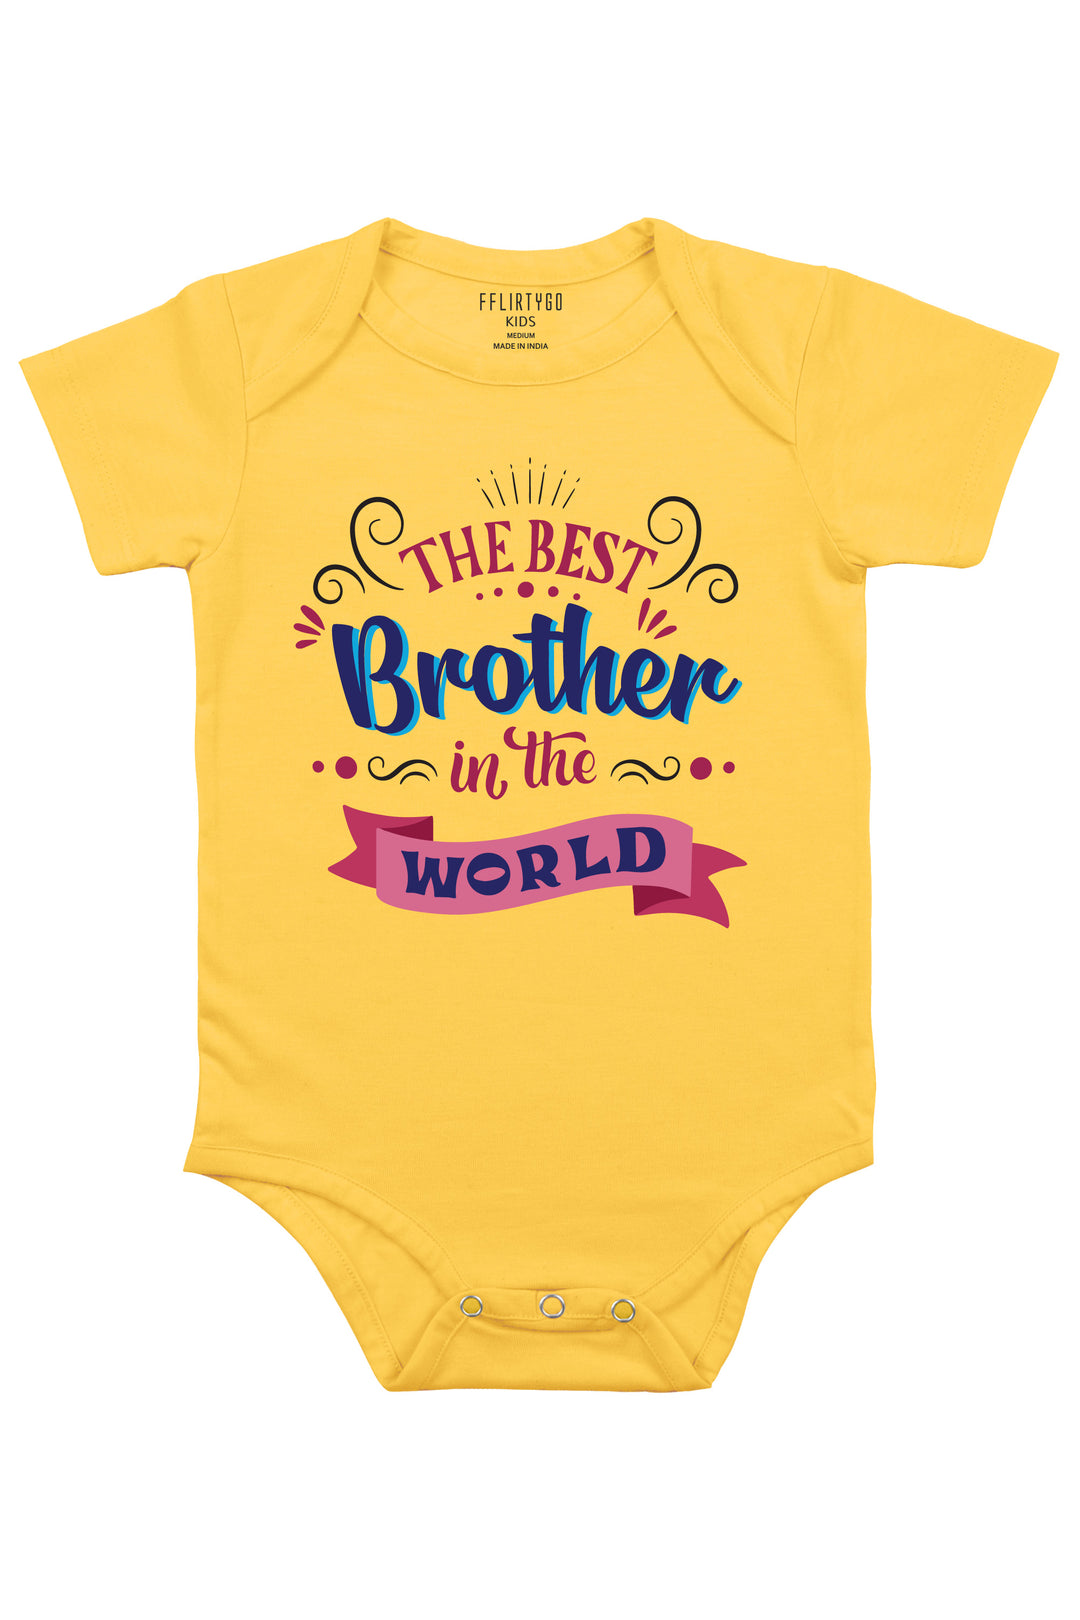 The Best Brother In The World Baby Romper | Onesies